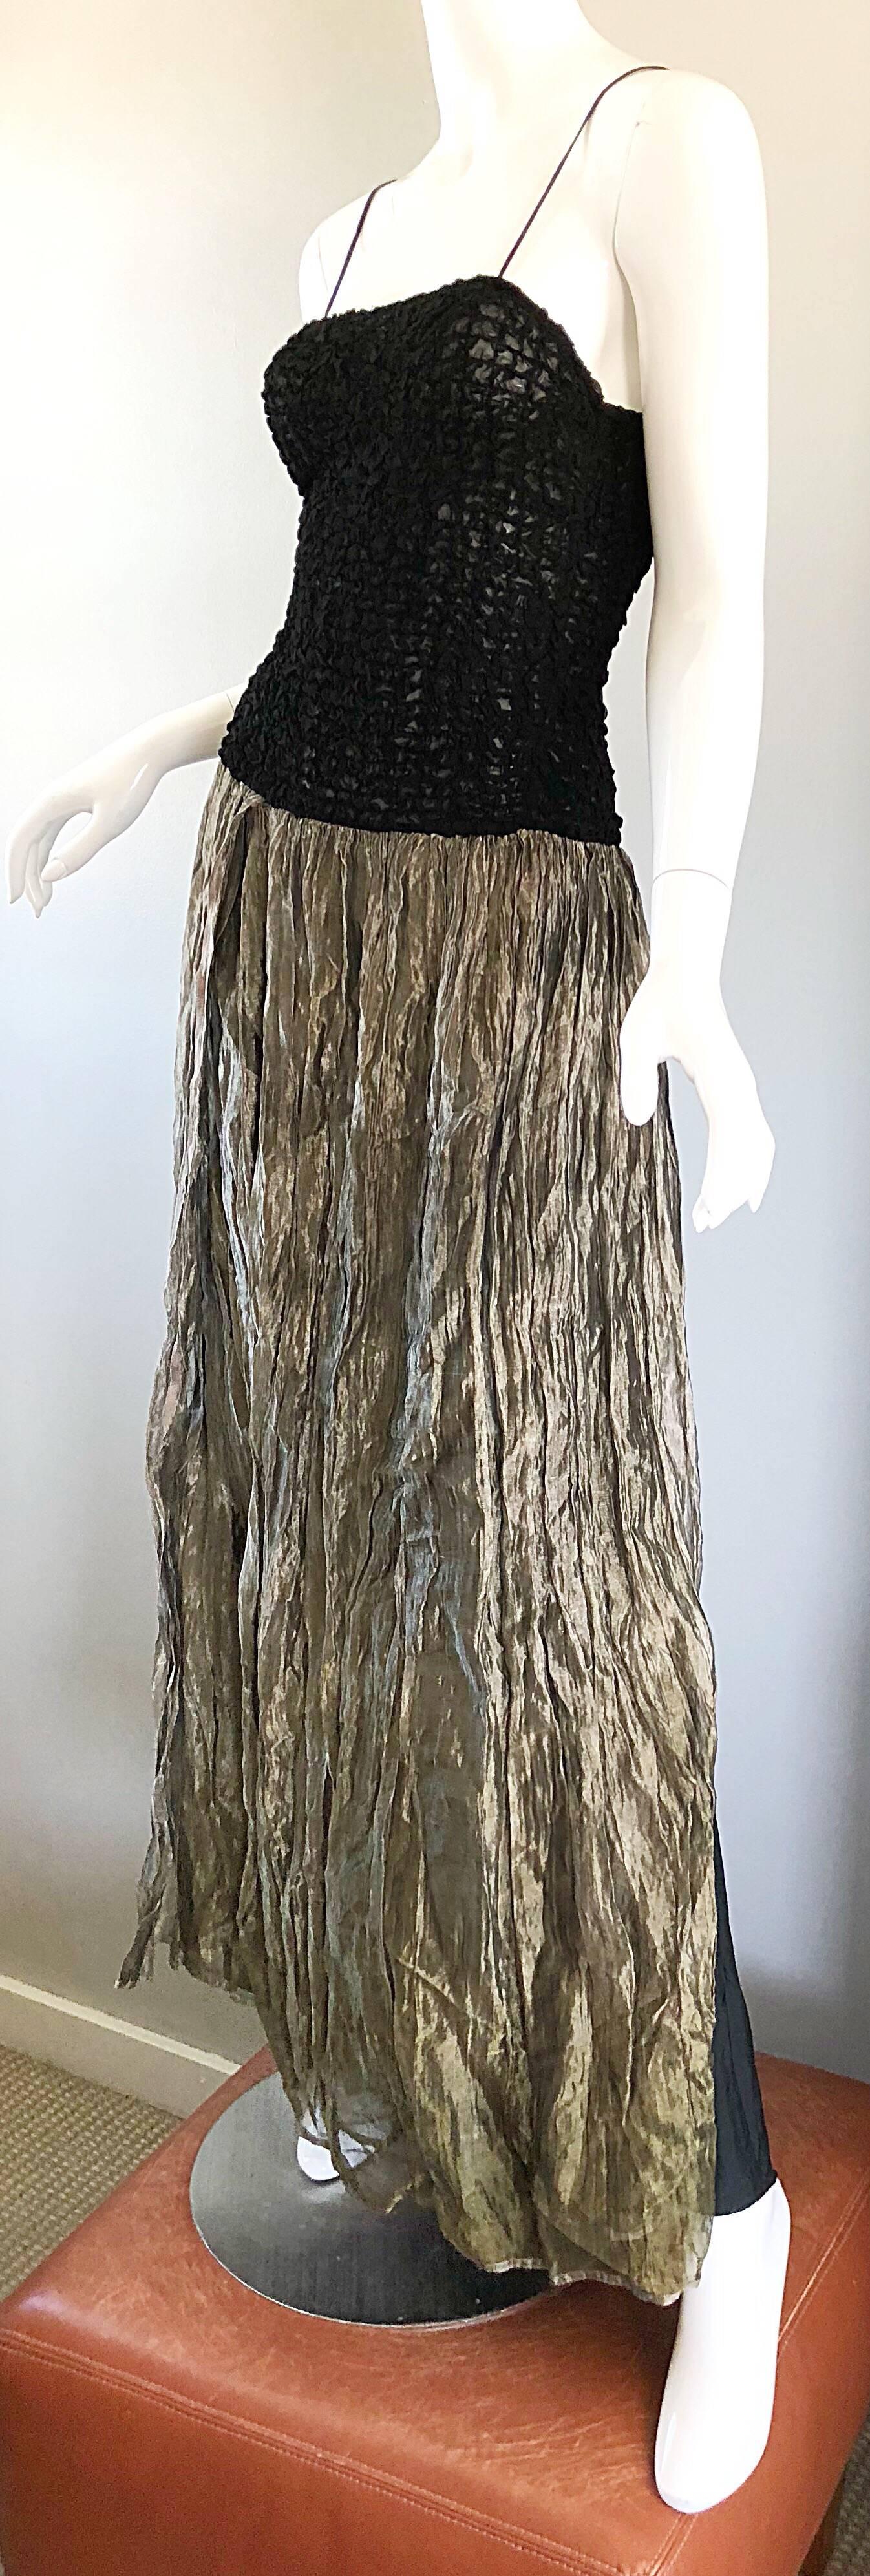 Vintage Morgane Le Fay 1990s Black + Gold Metallic Ombre 90s Evening Gown Dress In Excellent Condition For Sale In San Diego, CA